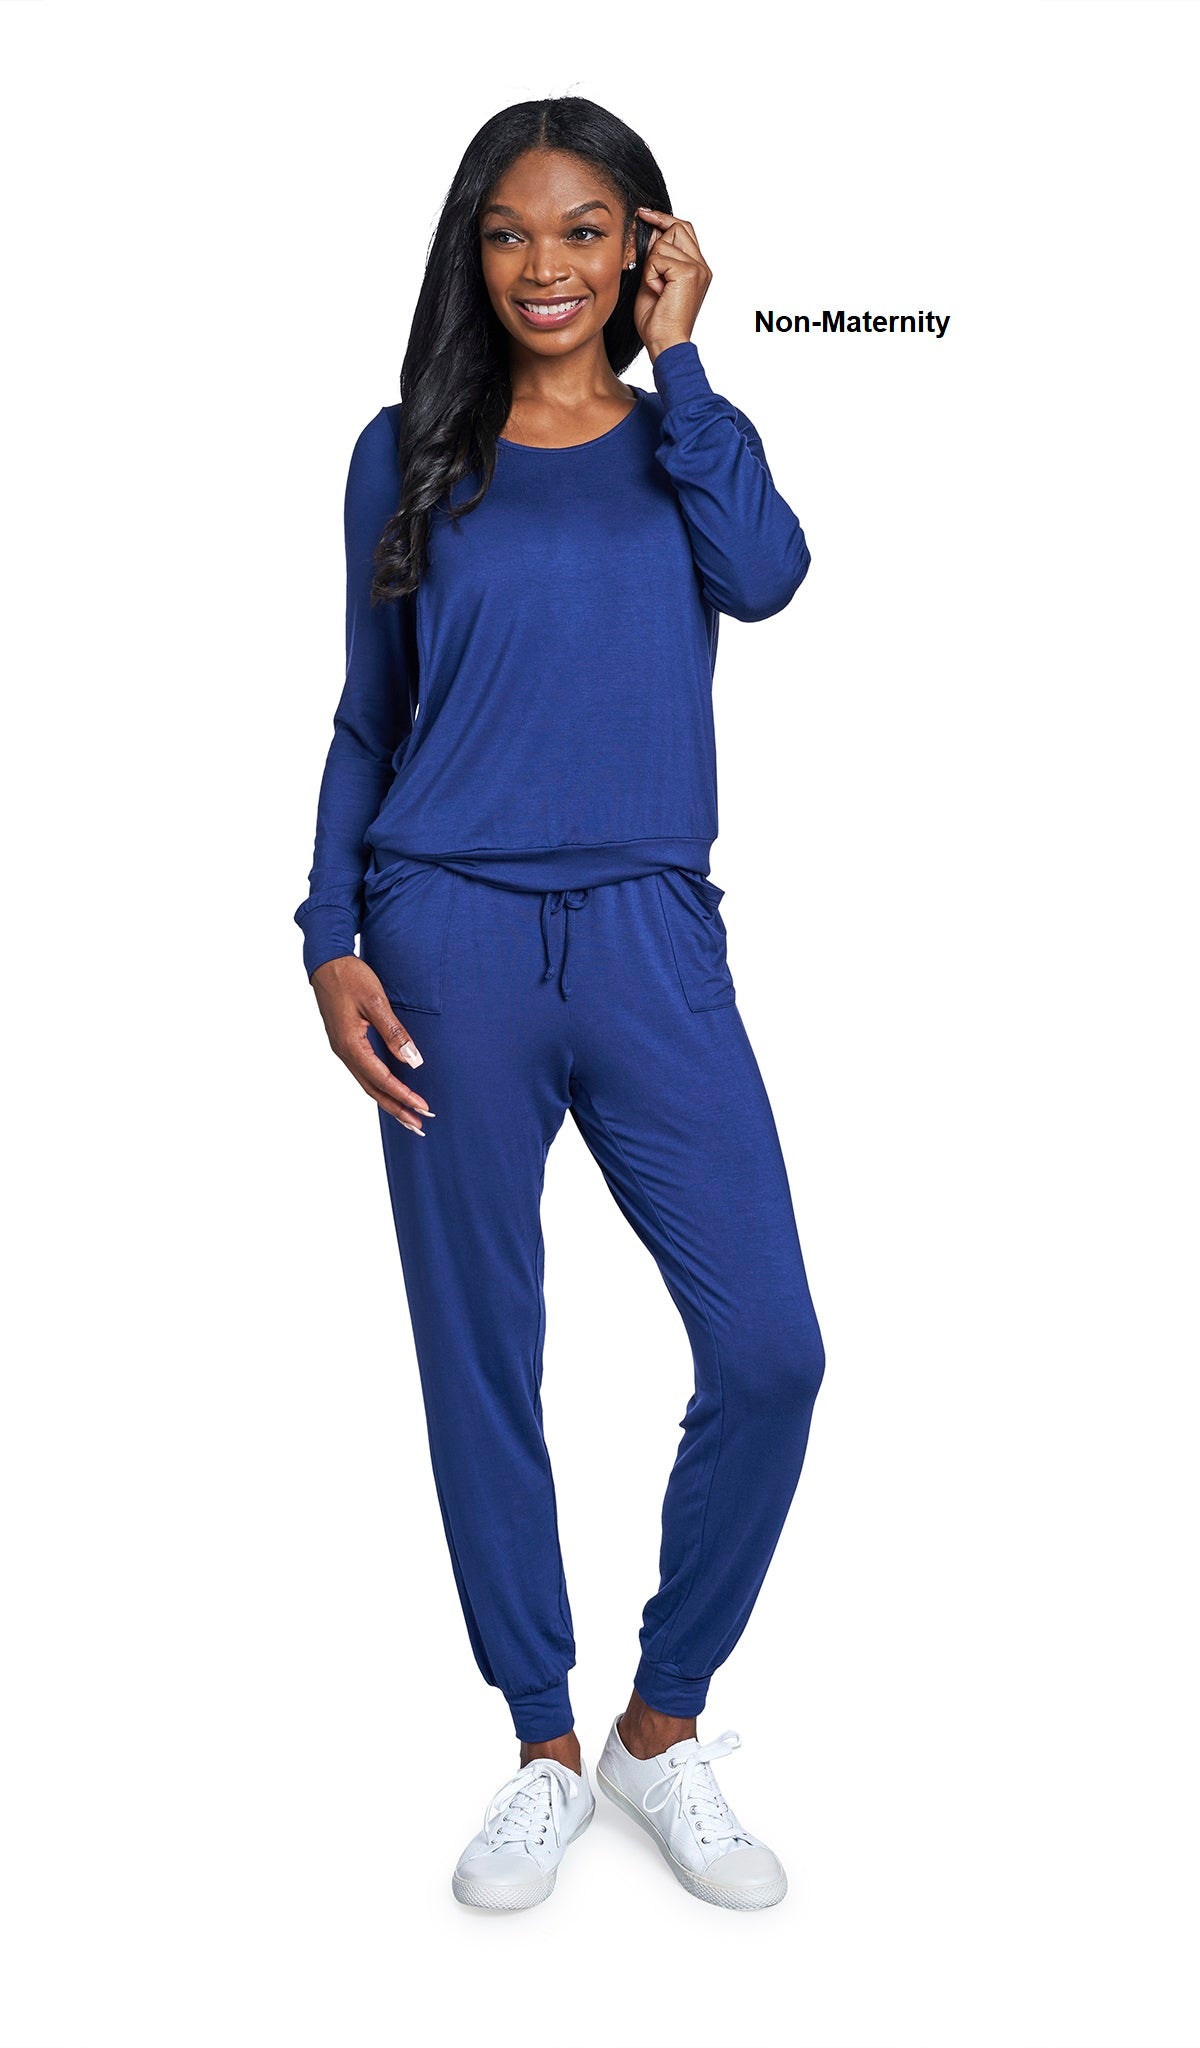 Denim Blue Whitney 2-Piece on woman wearing as non-maternity. Long sleeve top with nursing access on sides and long pant with cuff.